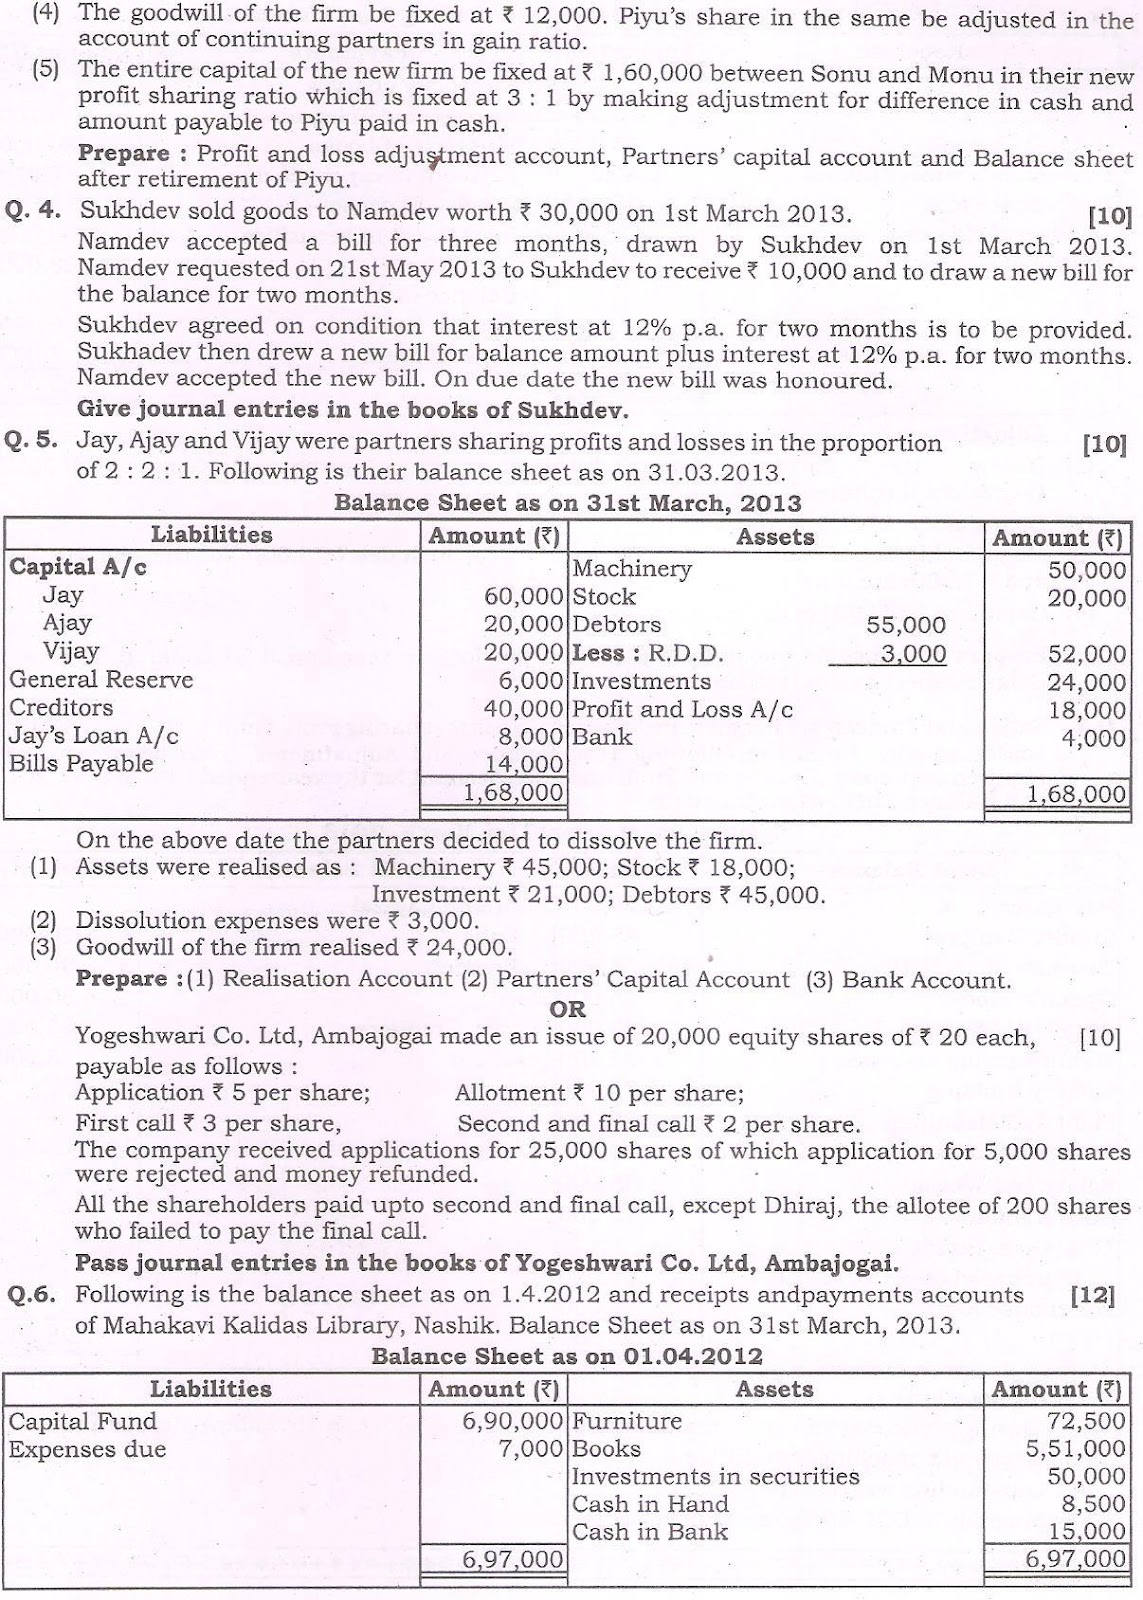 book-keeping & accountancy-october 2015 hsc-hsc.co.in